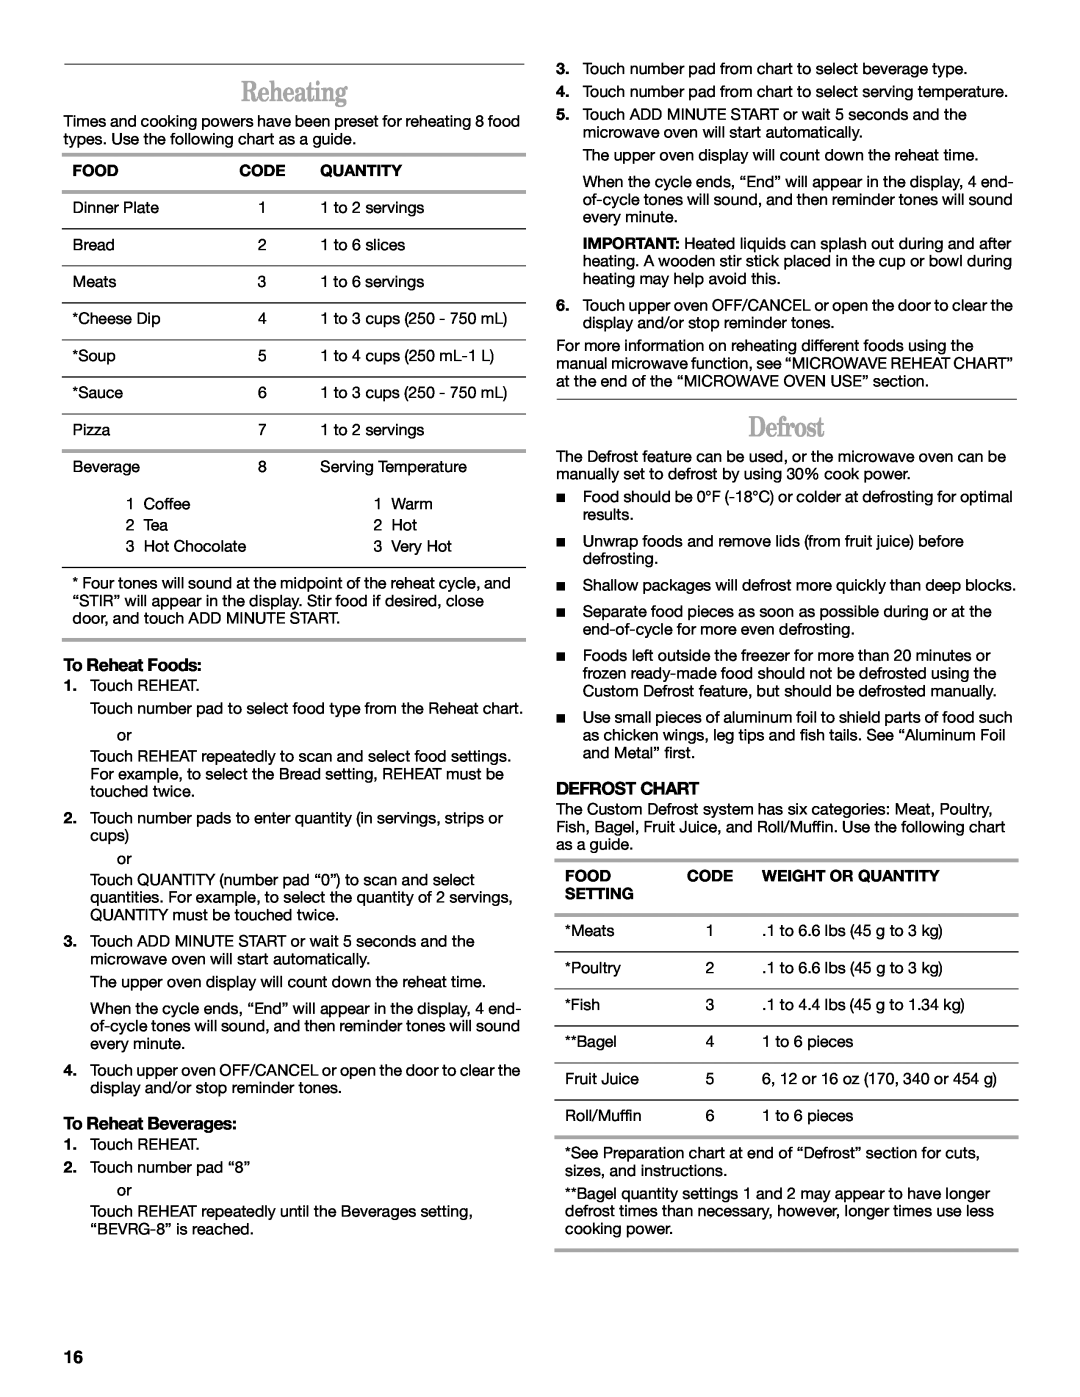 Whirlpool YGSC308, YGSC278 manual Reheating, To Reheat Foods, To Reheat Beverages, Defrost Chart 